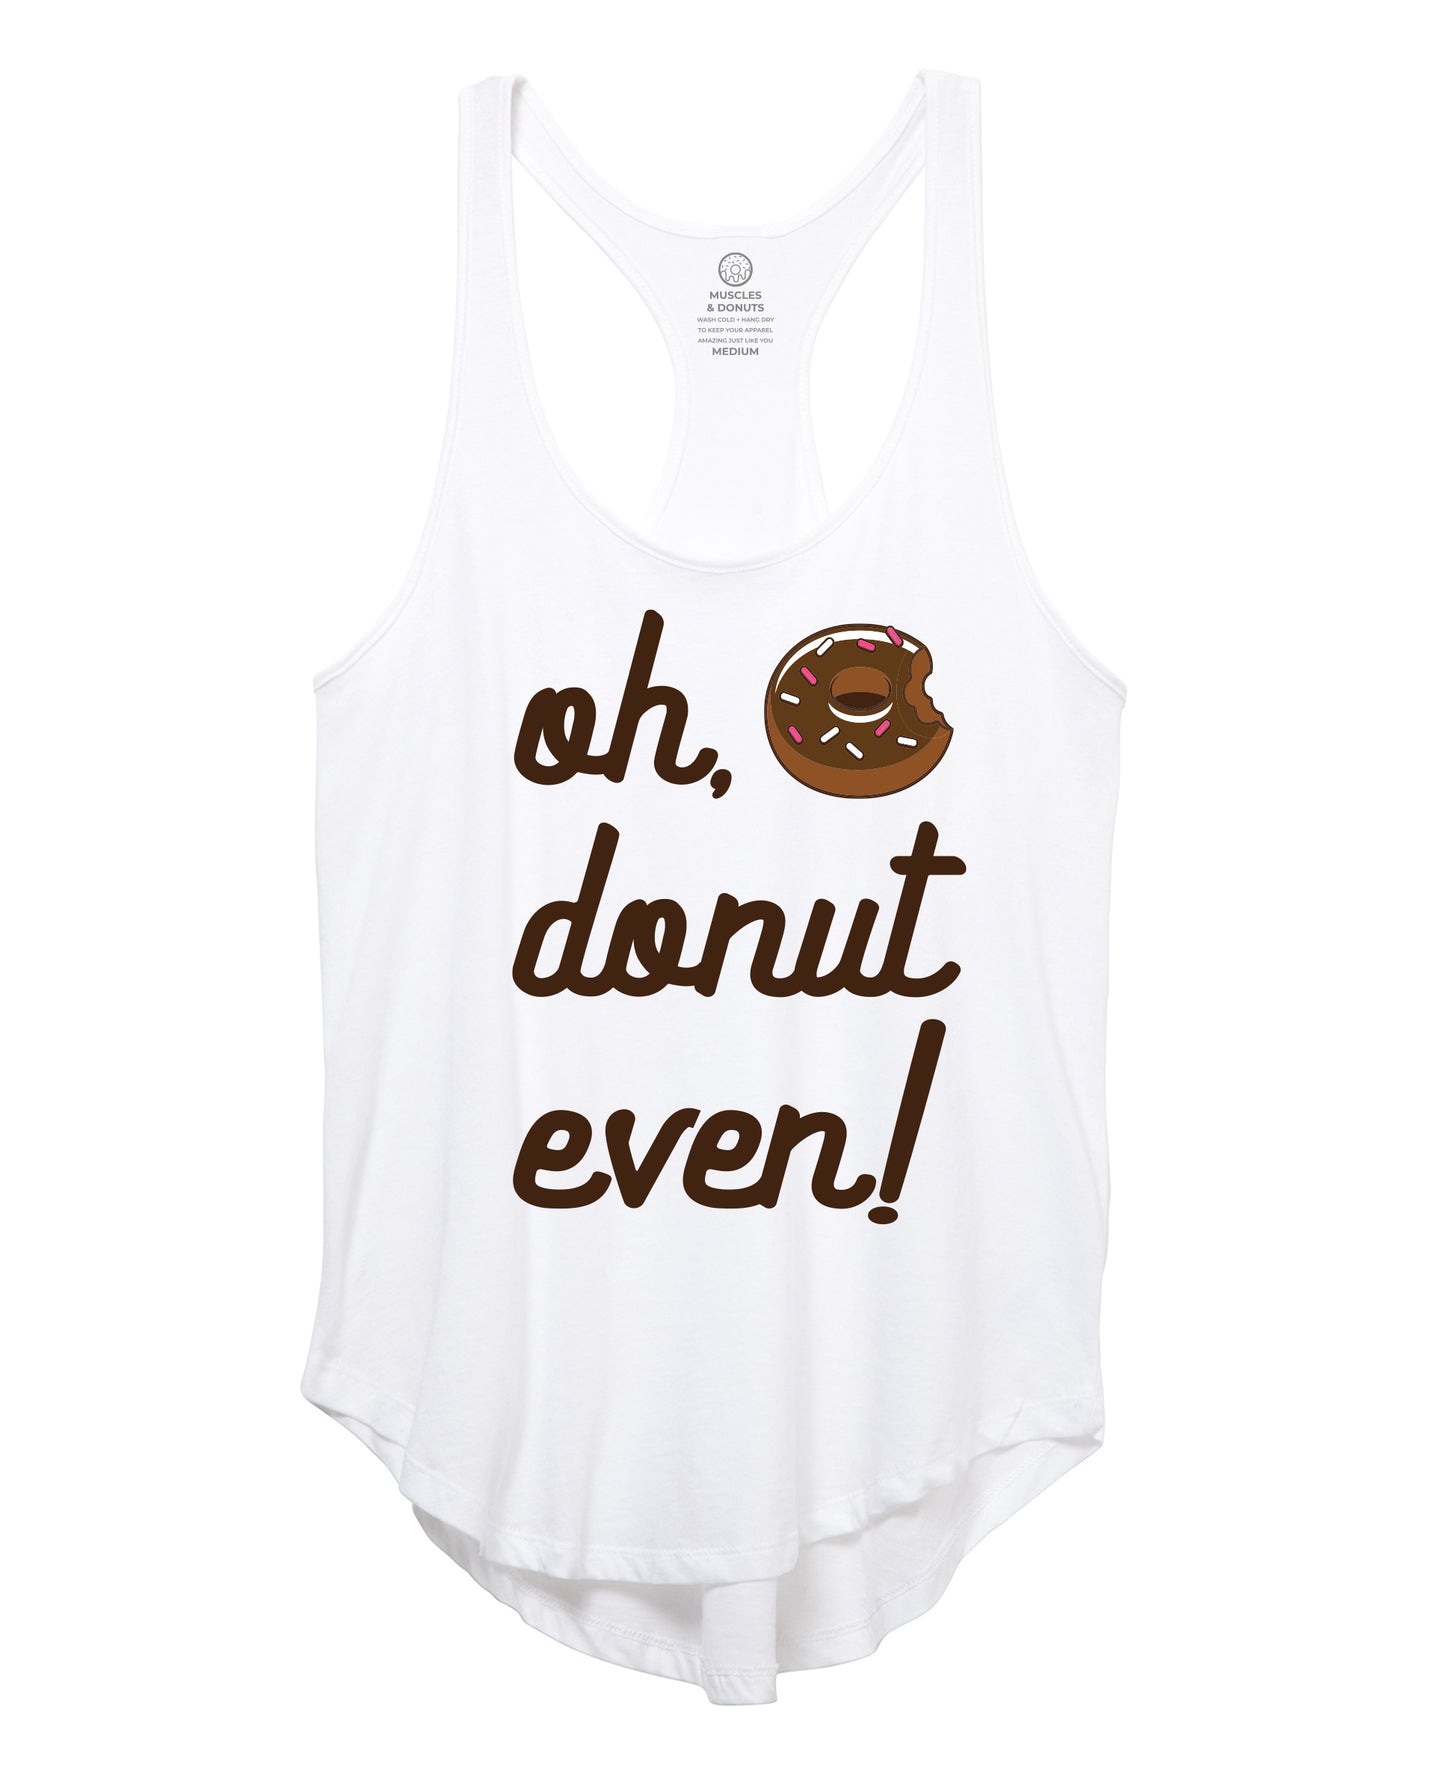 Oh, Donut Even!